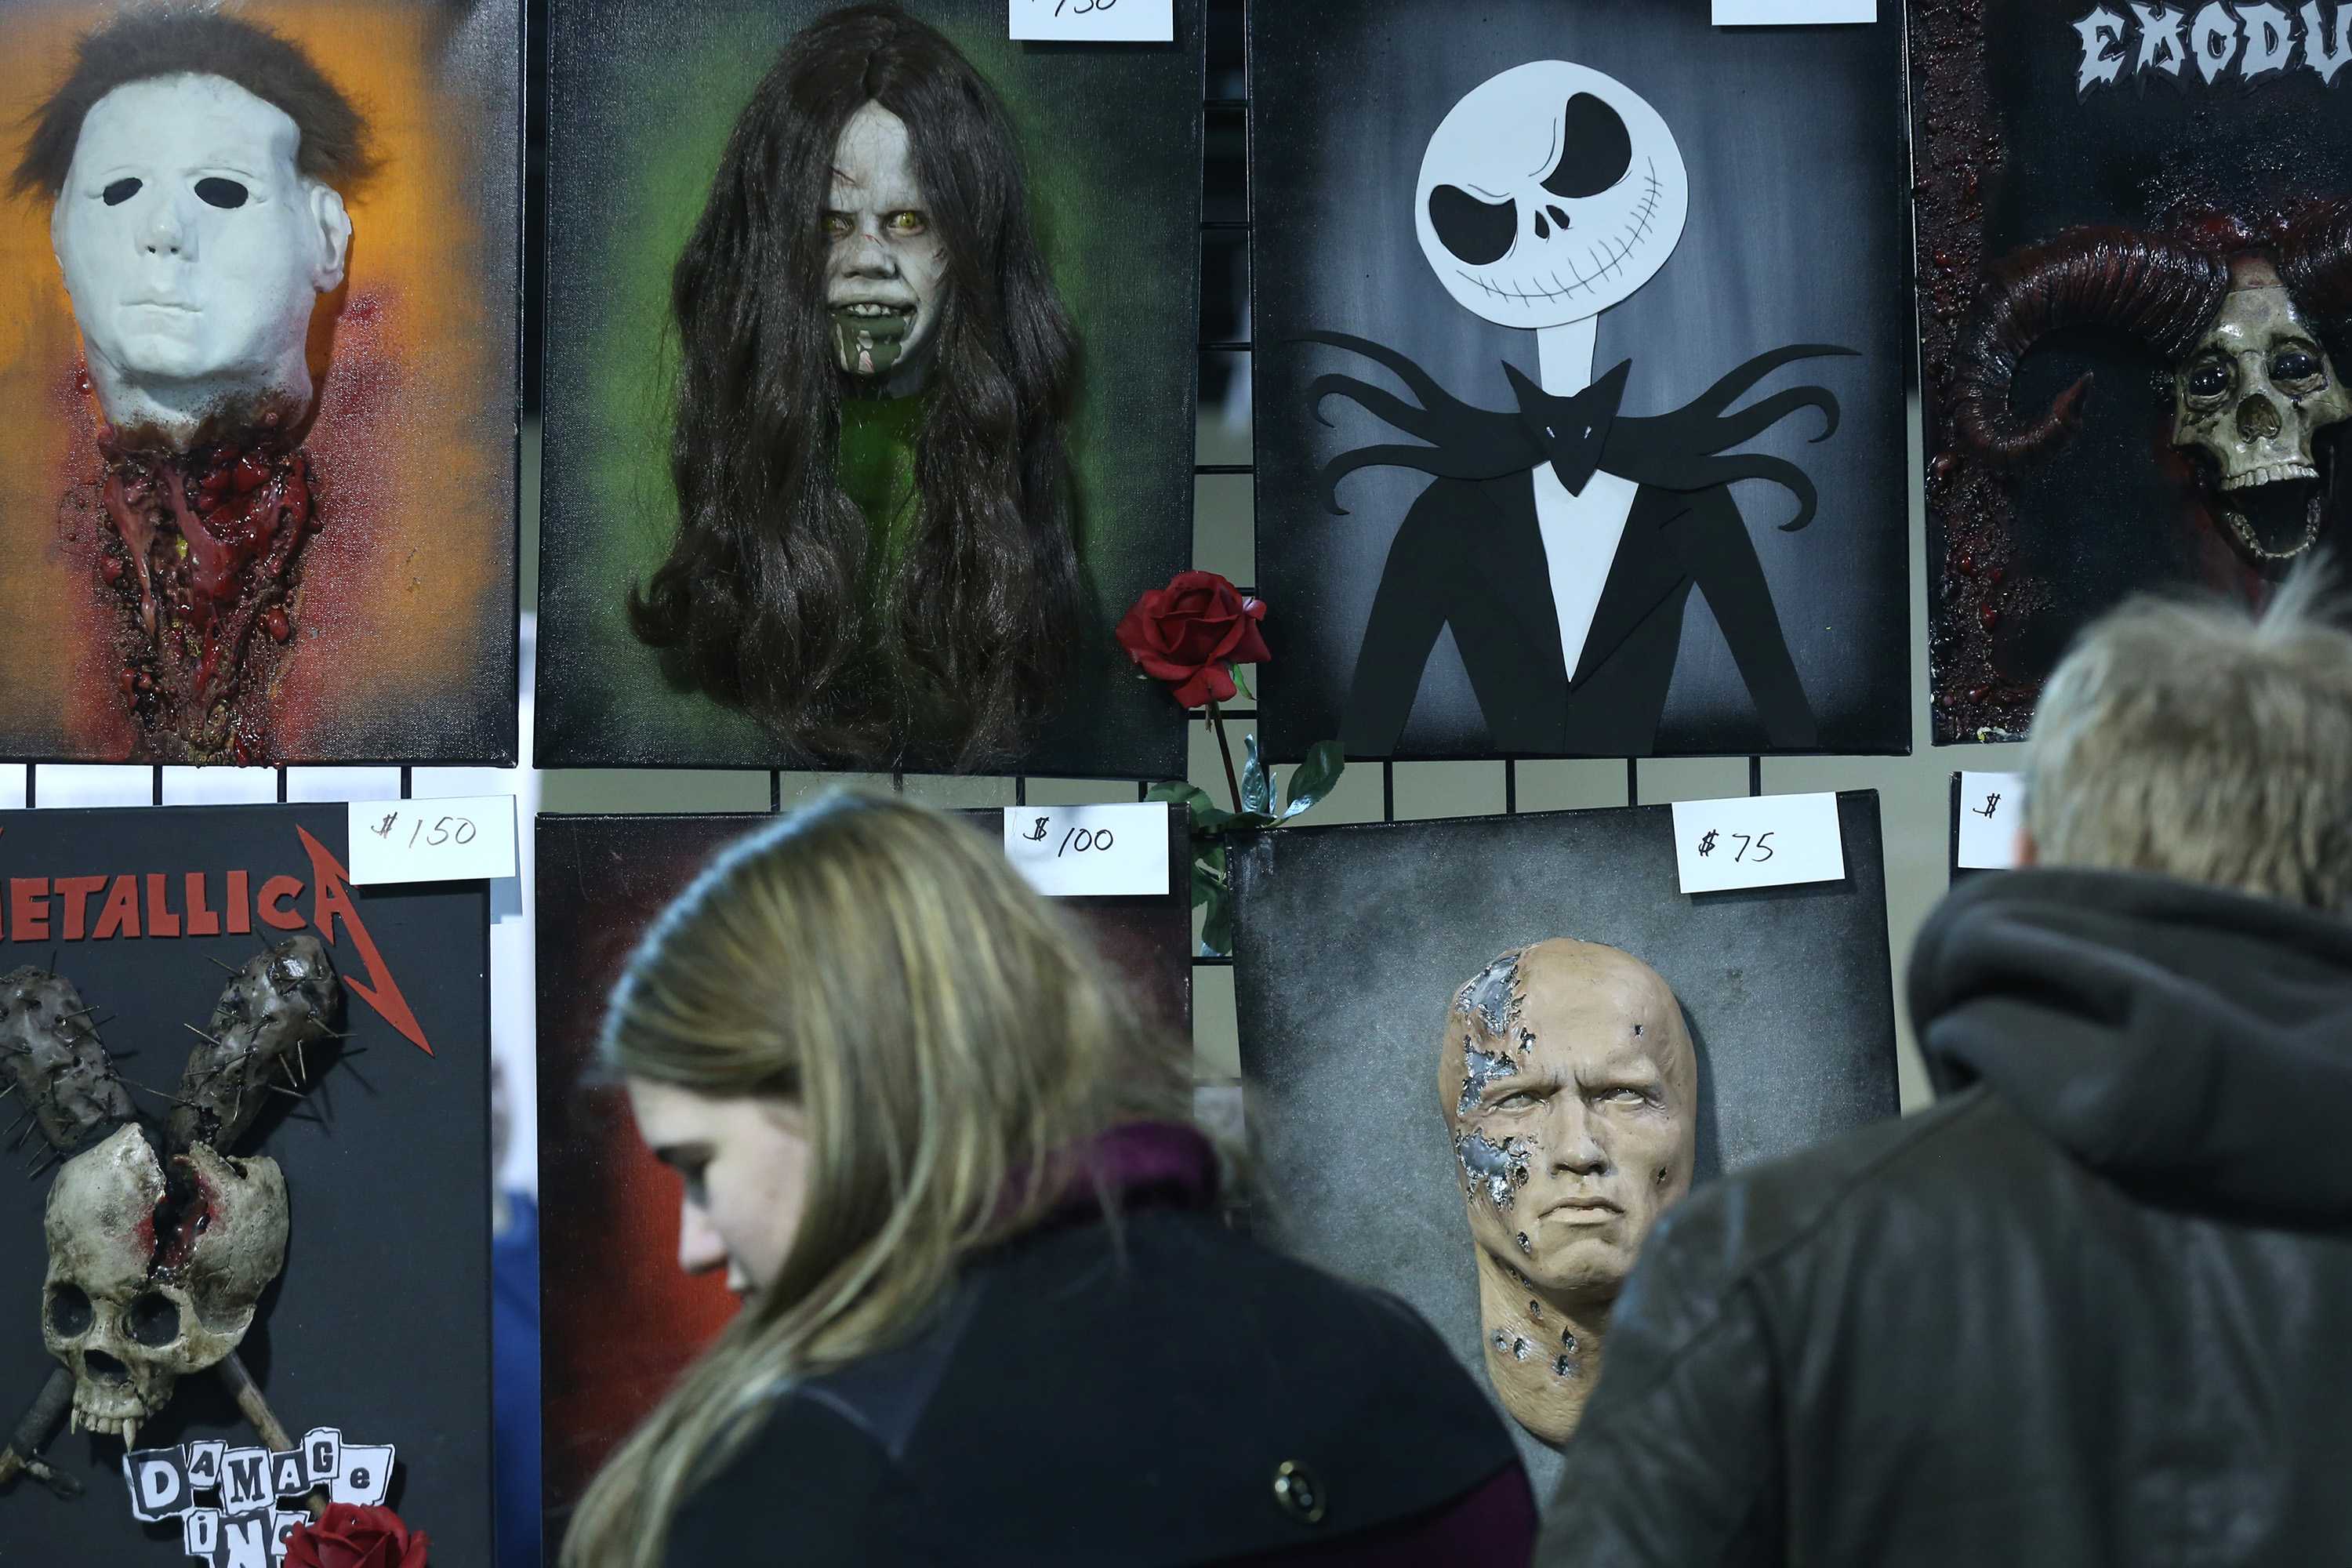 Attendees view masks of horror film characters during the Mad Mobster True Crime and Horror Expo at the Chicago Hilton and Towers Saturday, Feb. 14, 2015, in Chicago.
(John J. Kim/Chicago Tribune/TNS/MCT)